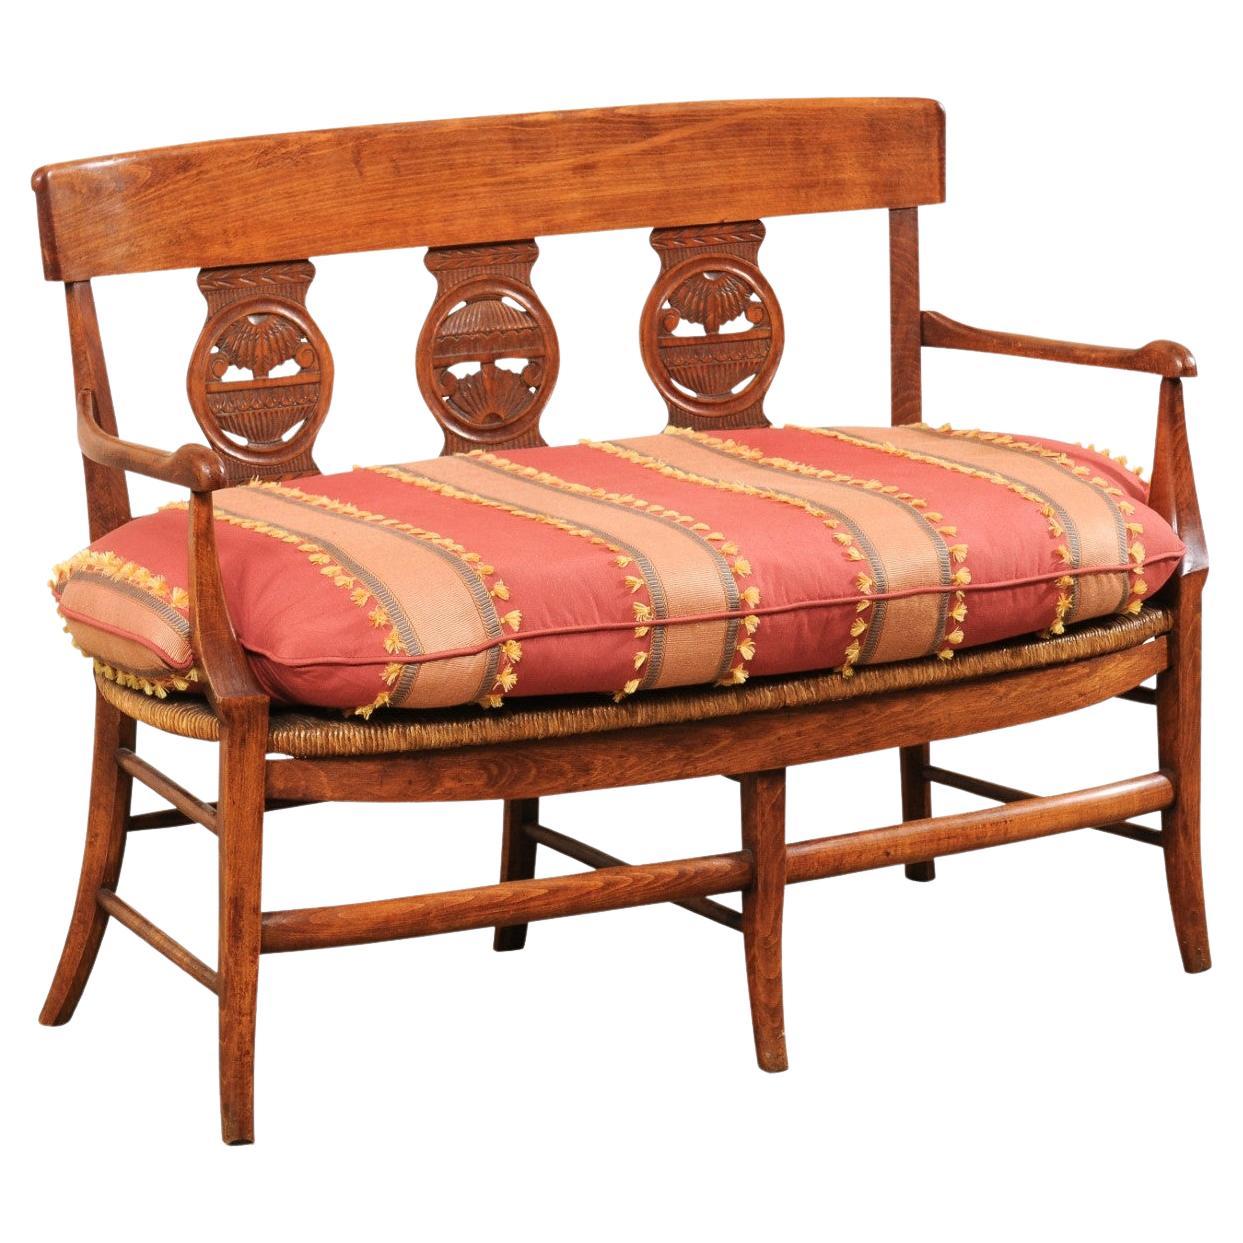 French Country Bench W/Neoclassic Elements Has Rushed Seat & Upholstered Cushion